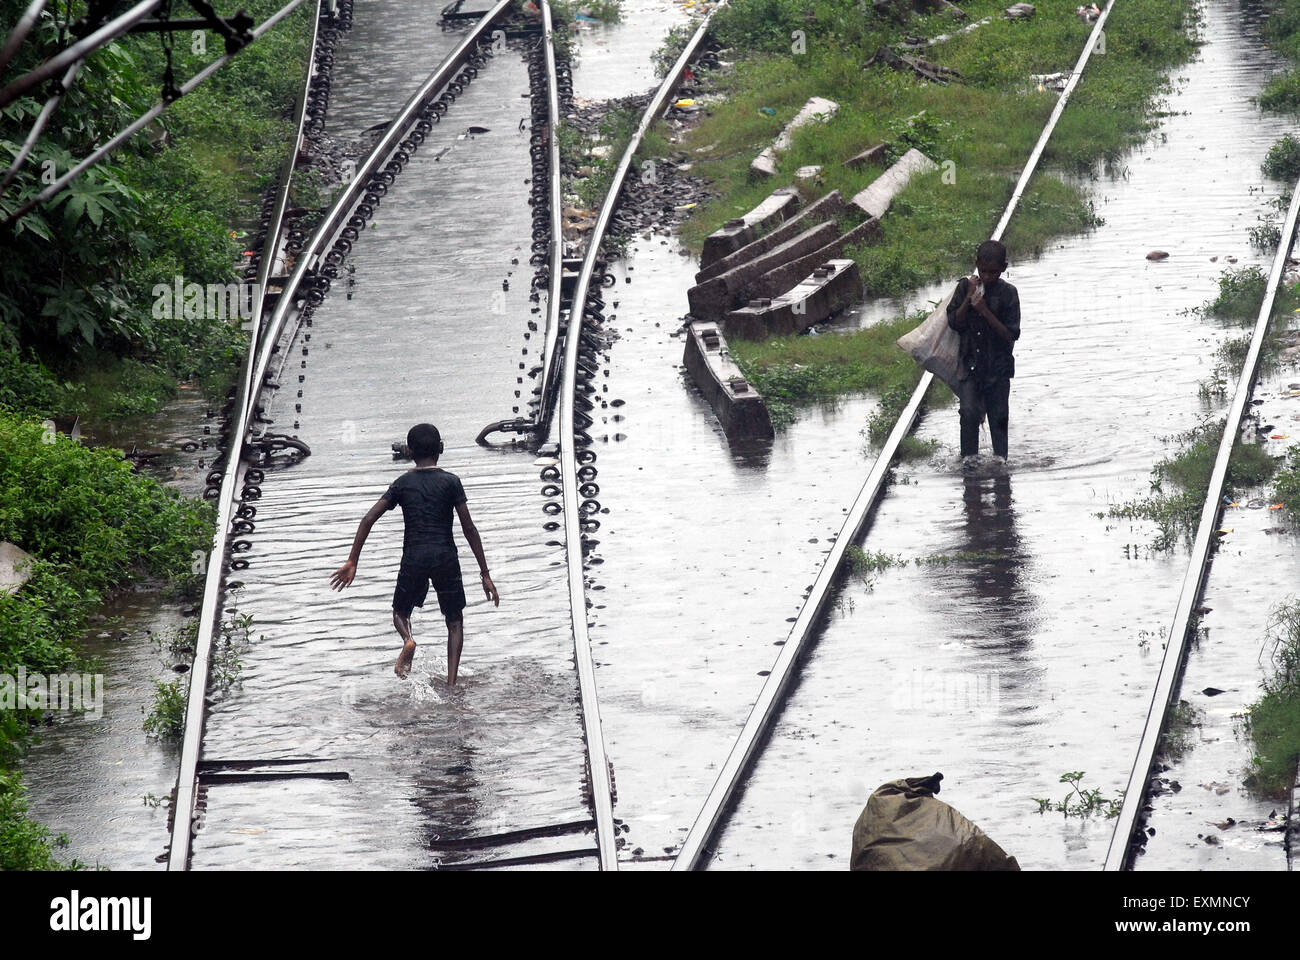 Children living in slums play in the flooded waters on the railway tracks caused due to heavy rains at Kurla Station Mumbai Stock Photo